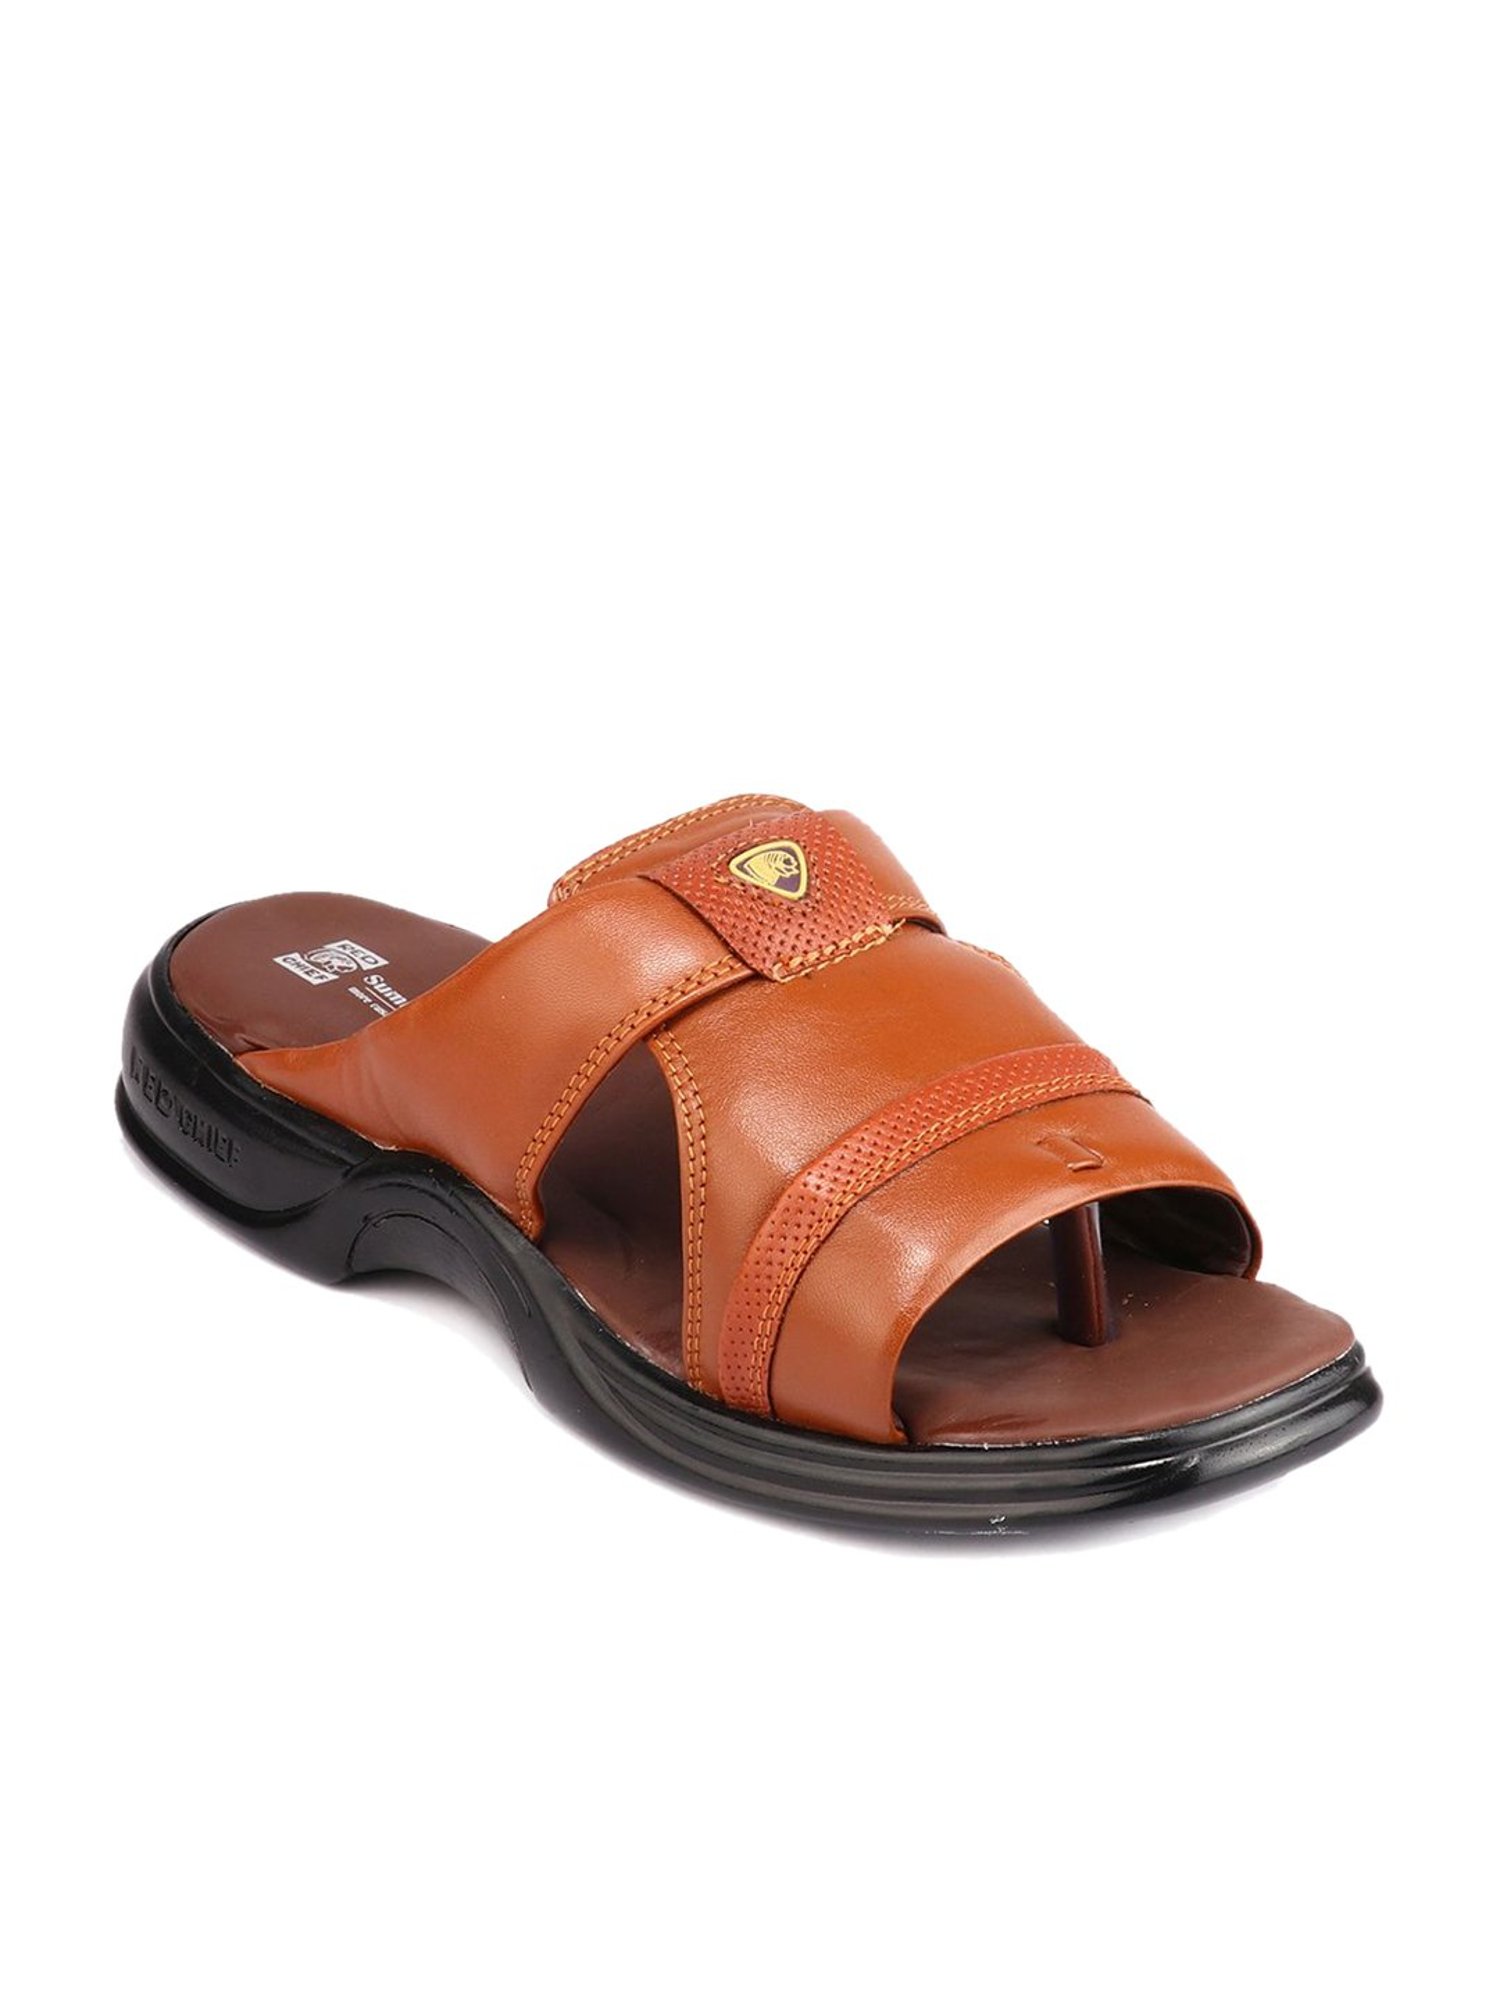 Red Chief R.Brown Leather casual sandals for men : Amazon.in: Fashion